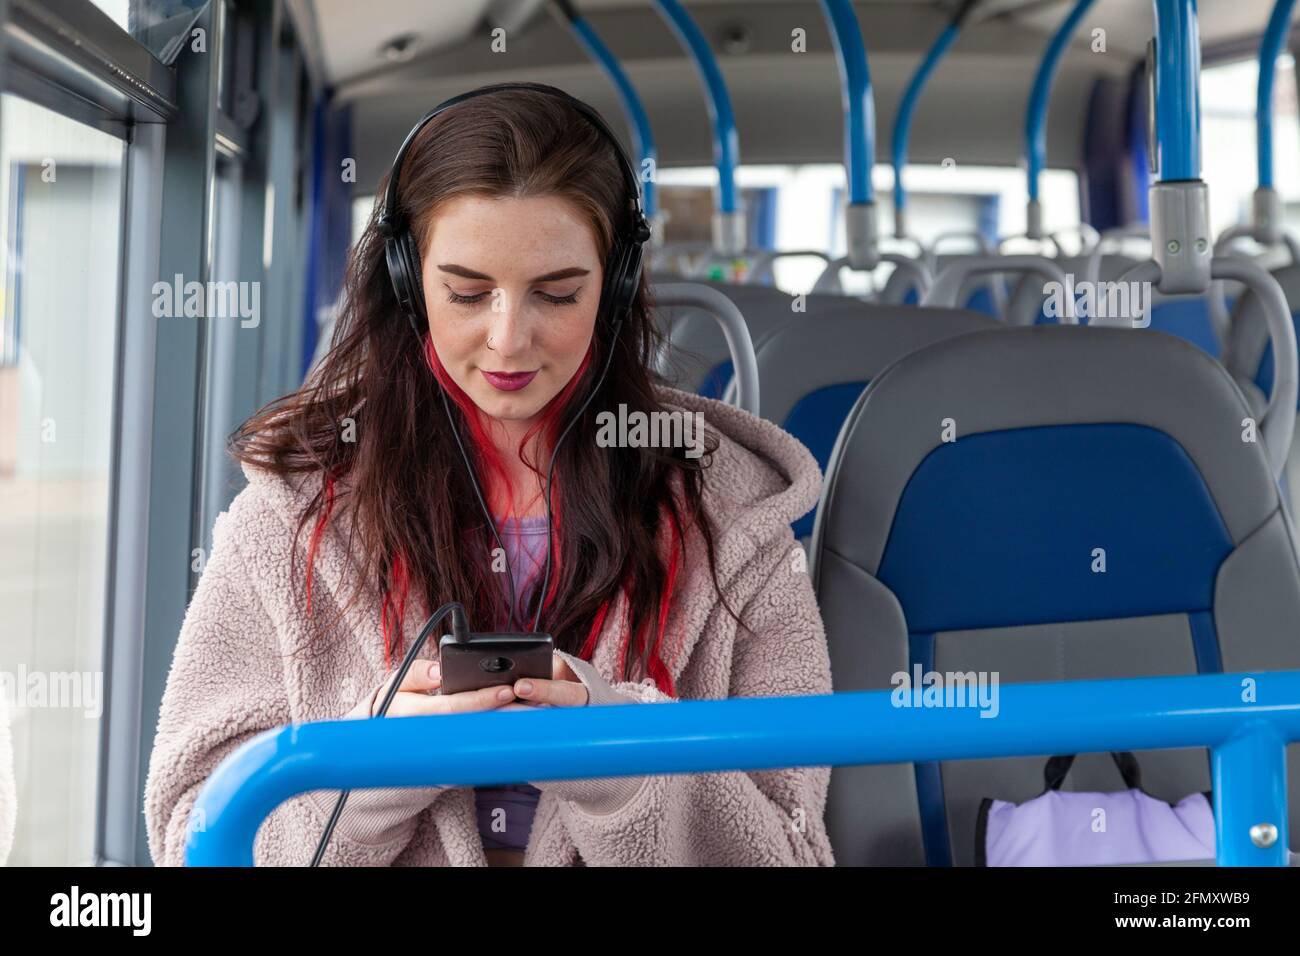 A young woman sitting on a bus with headphones on and looking at her phone Stock Photo